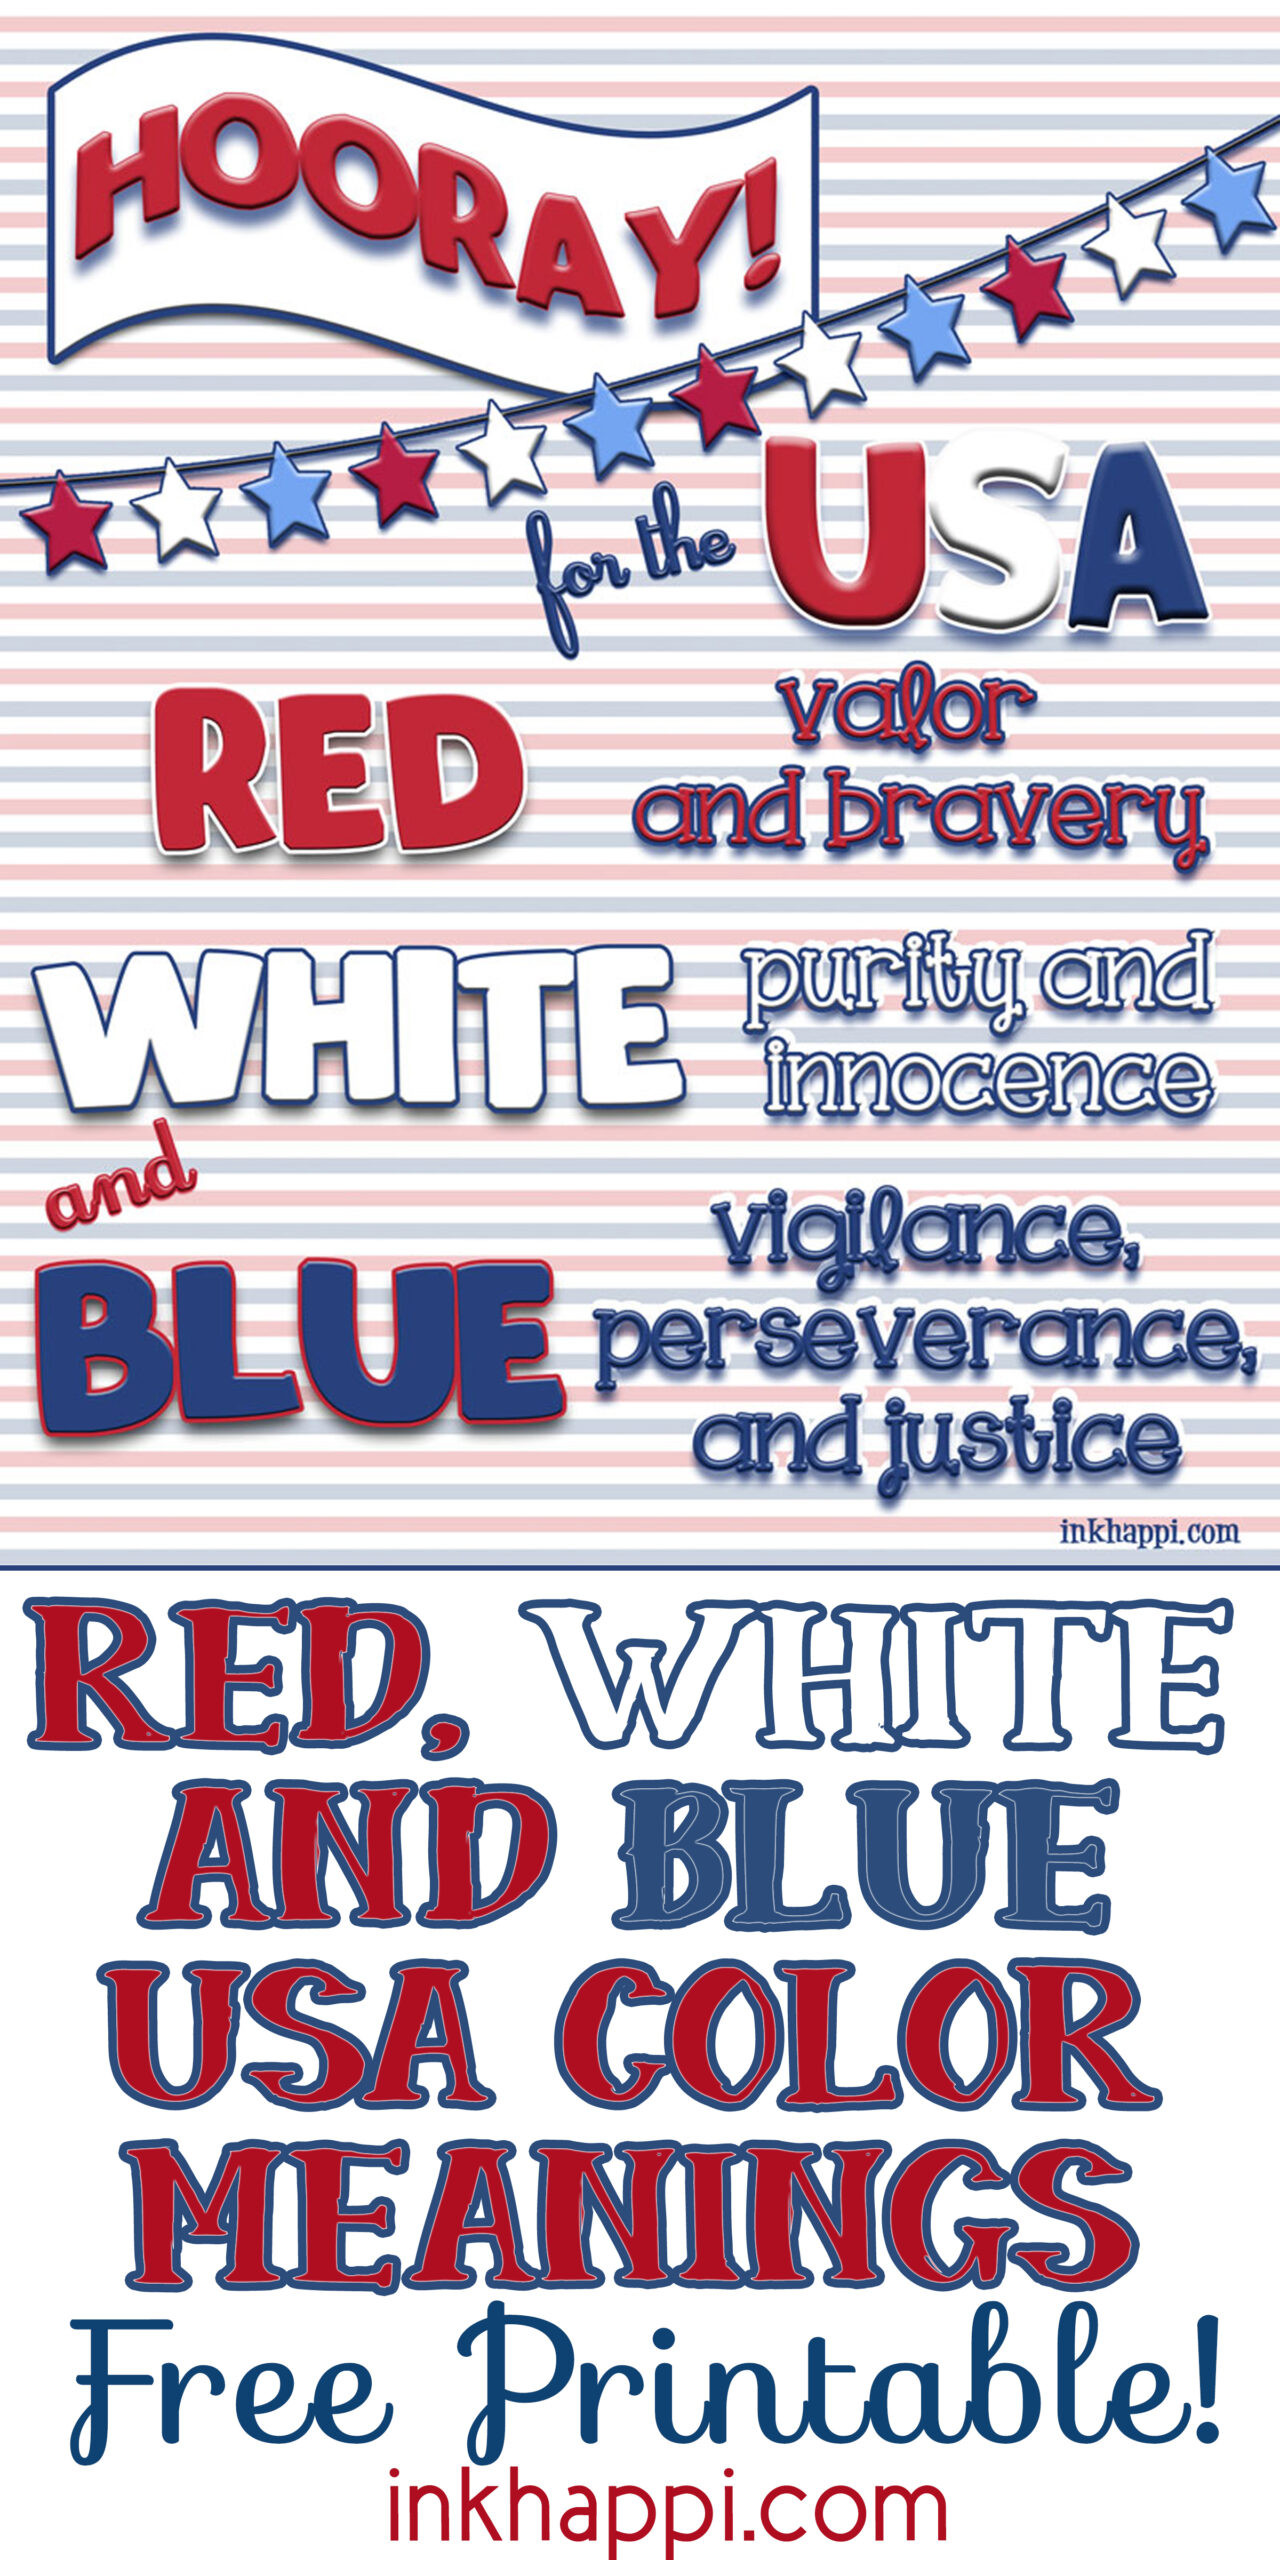 How We Do Red, White & Blue, red, blue